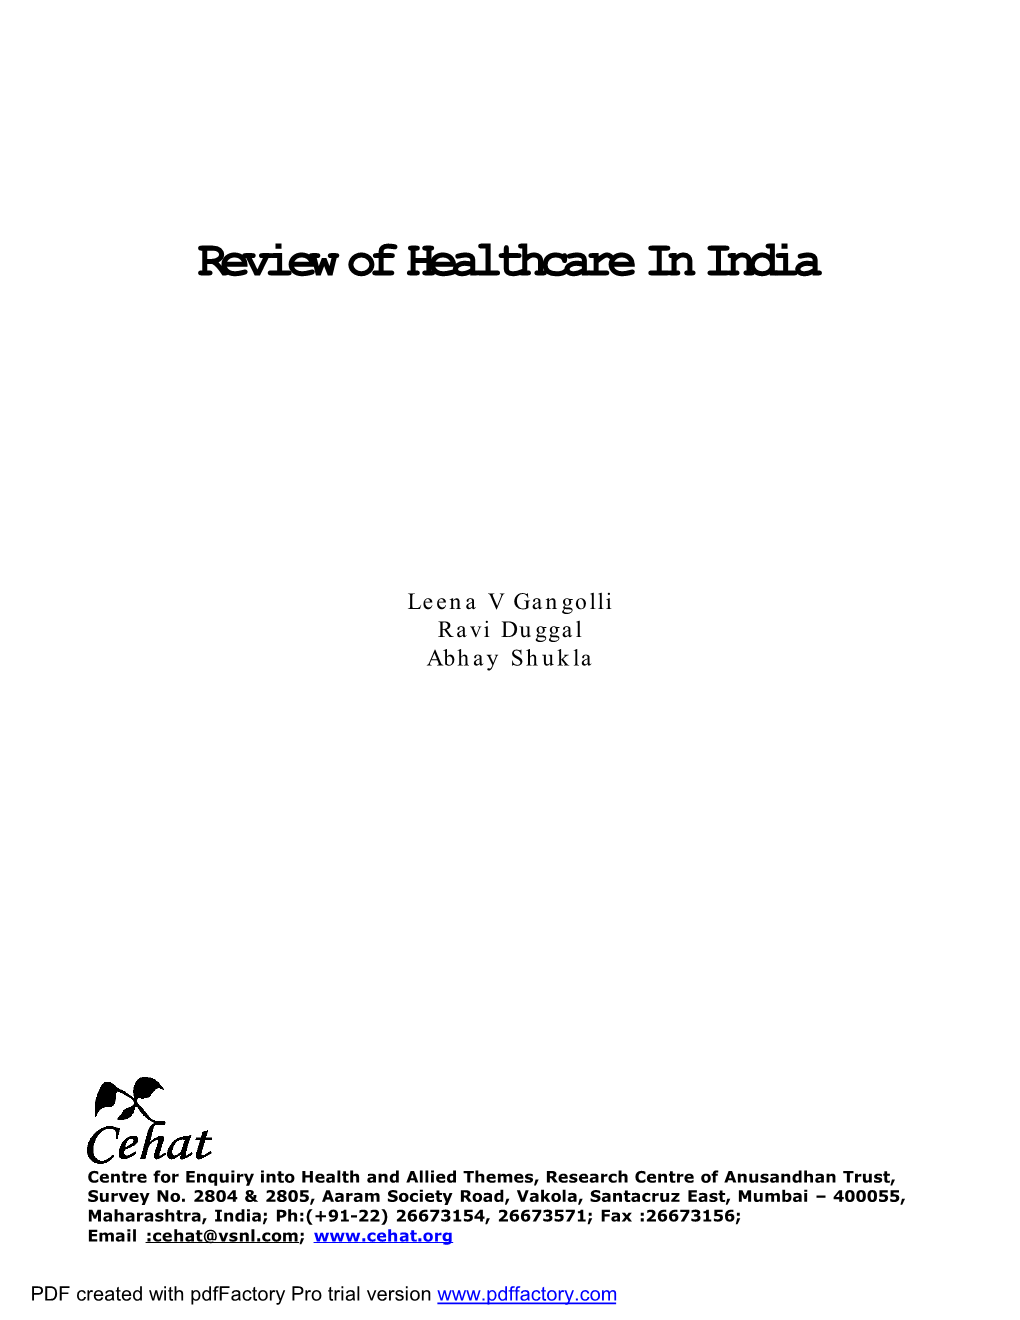 Review of Healthcare in India